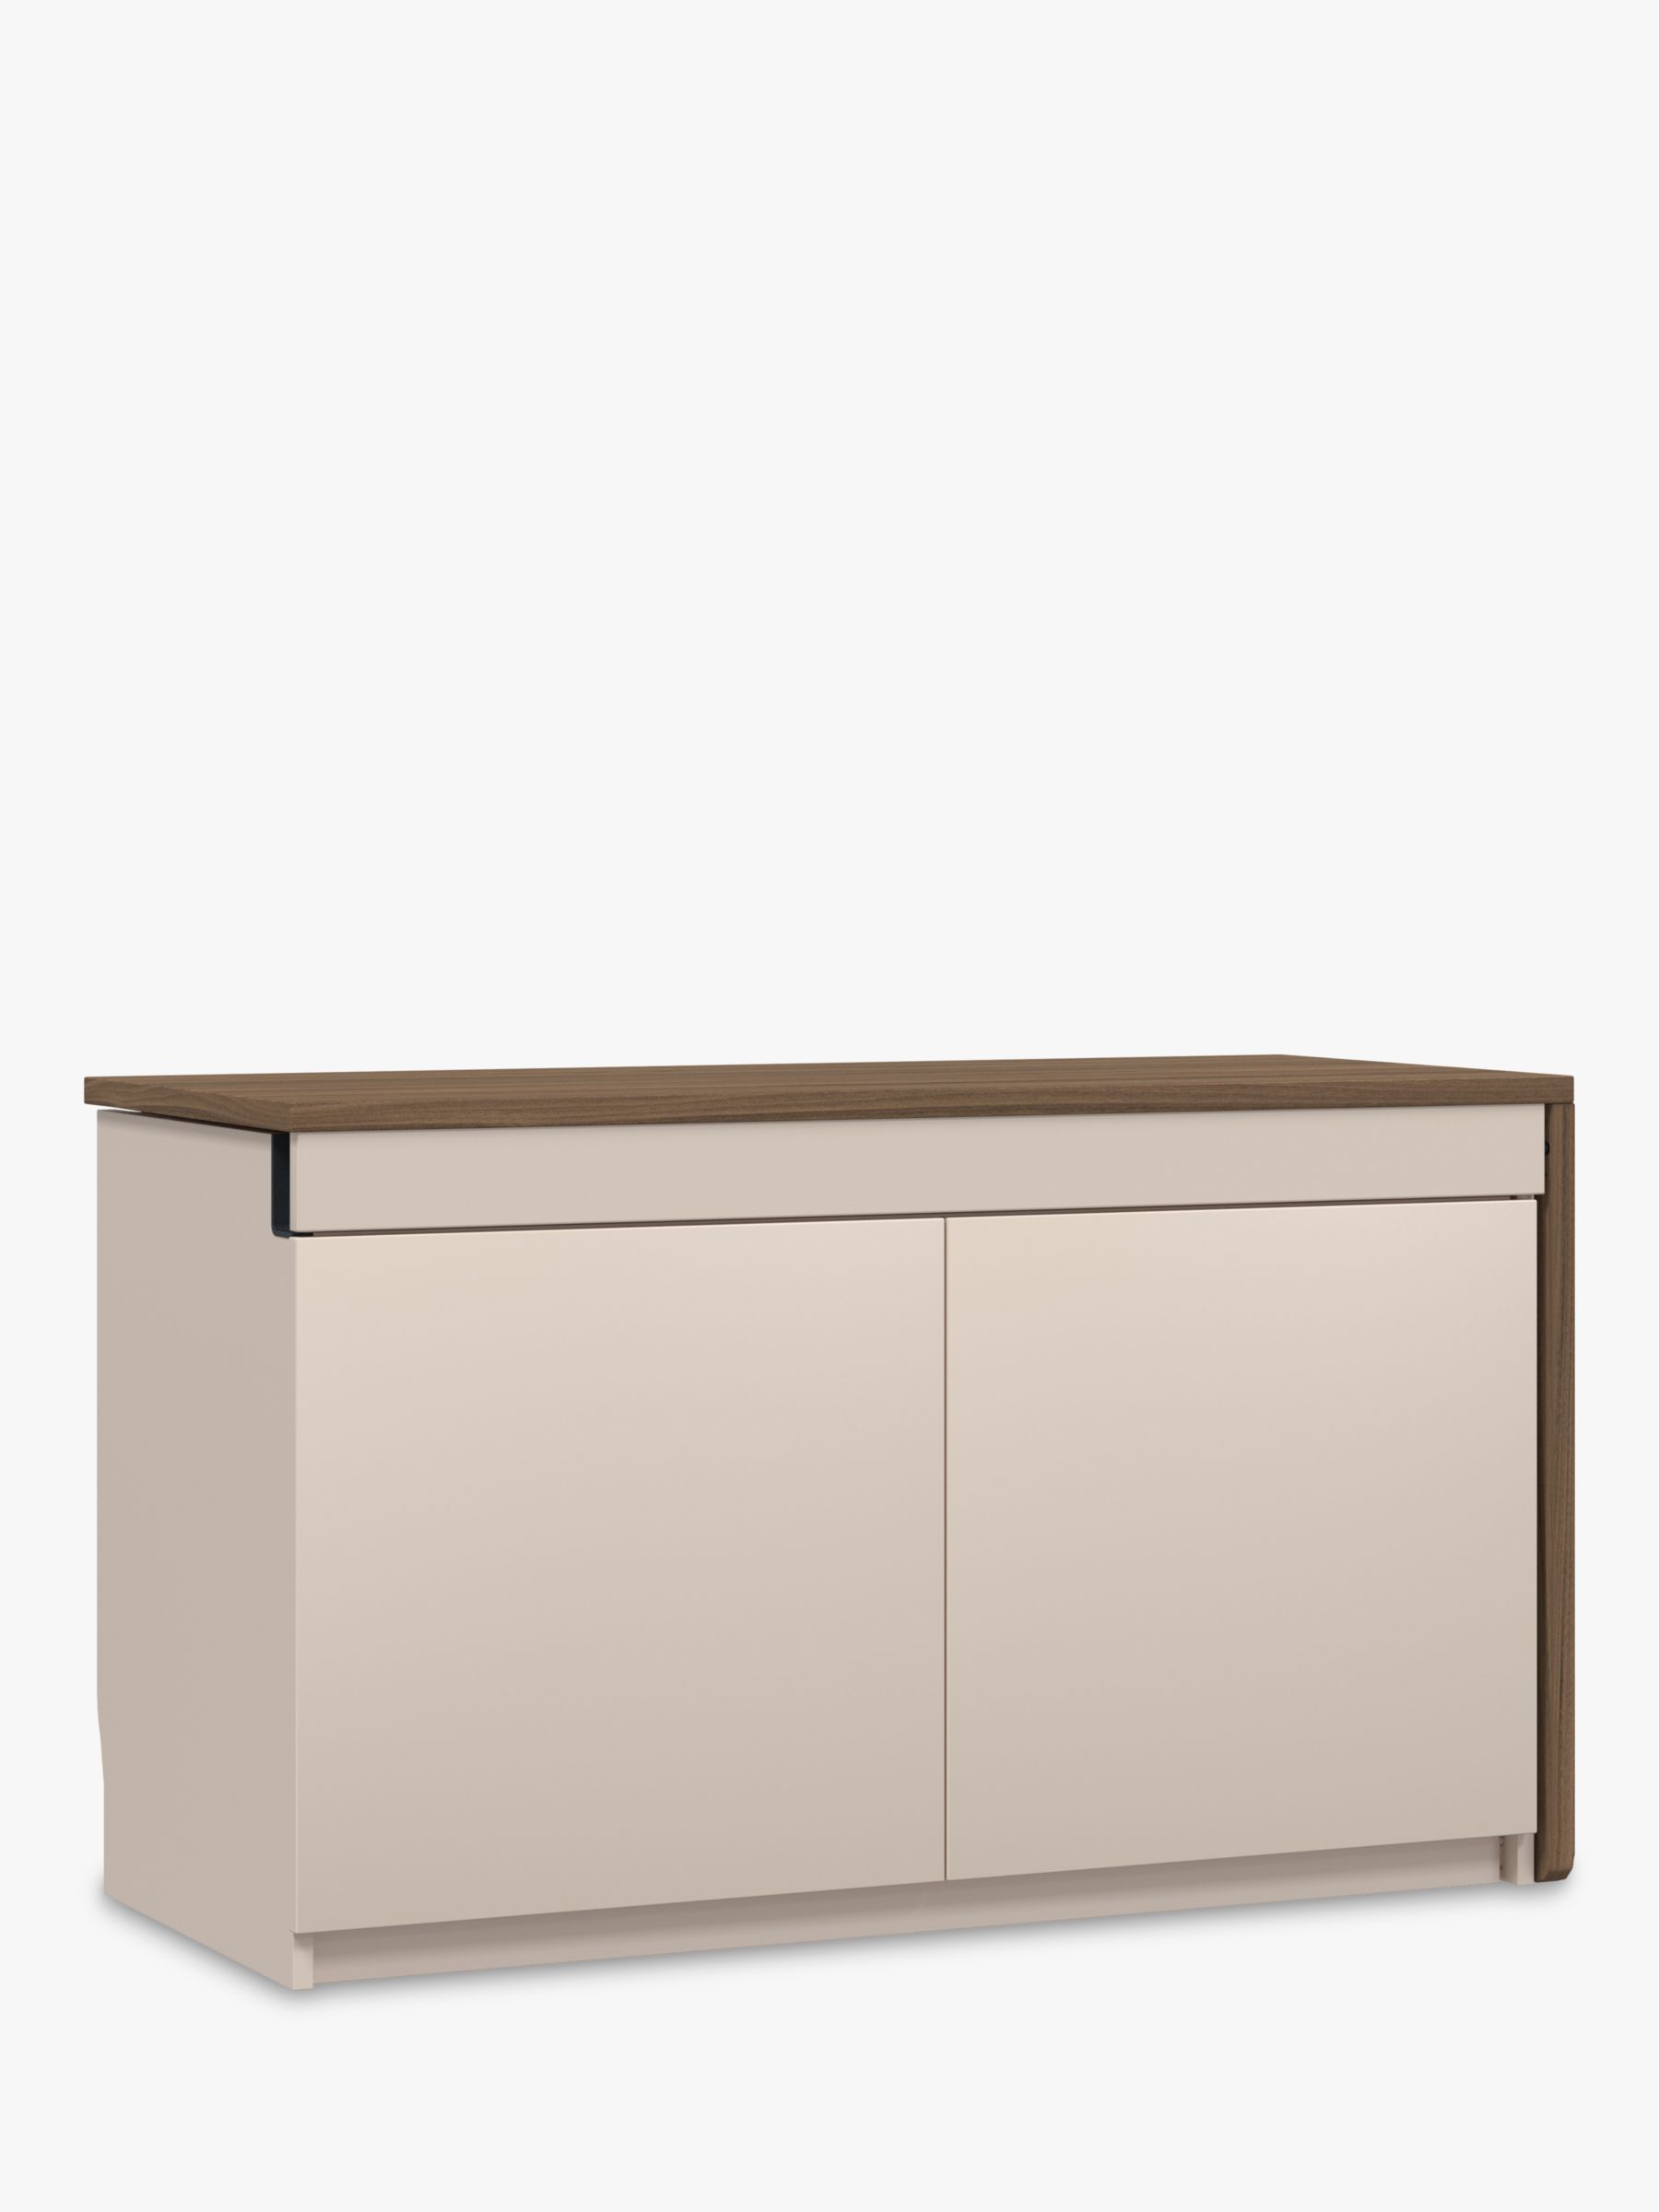 Photo of Bisley hideaway swing sideboard with right hand desk & power sockets